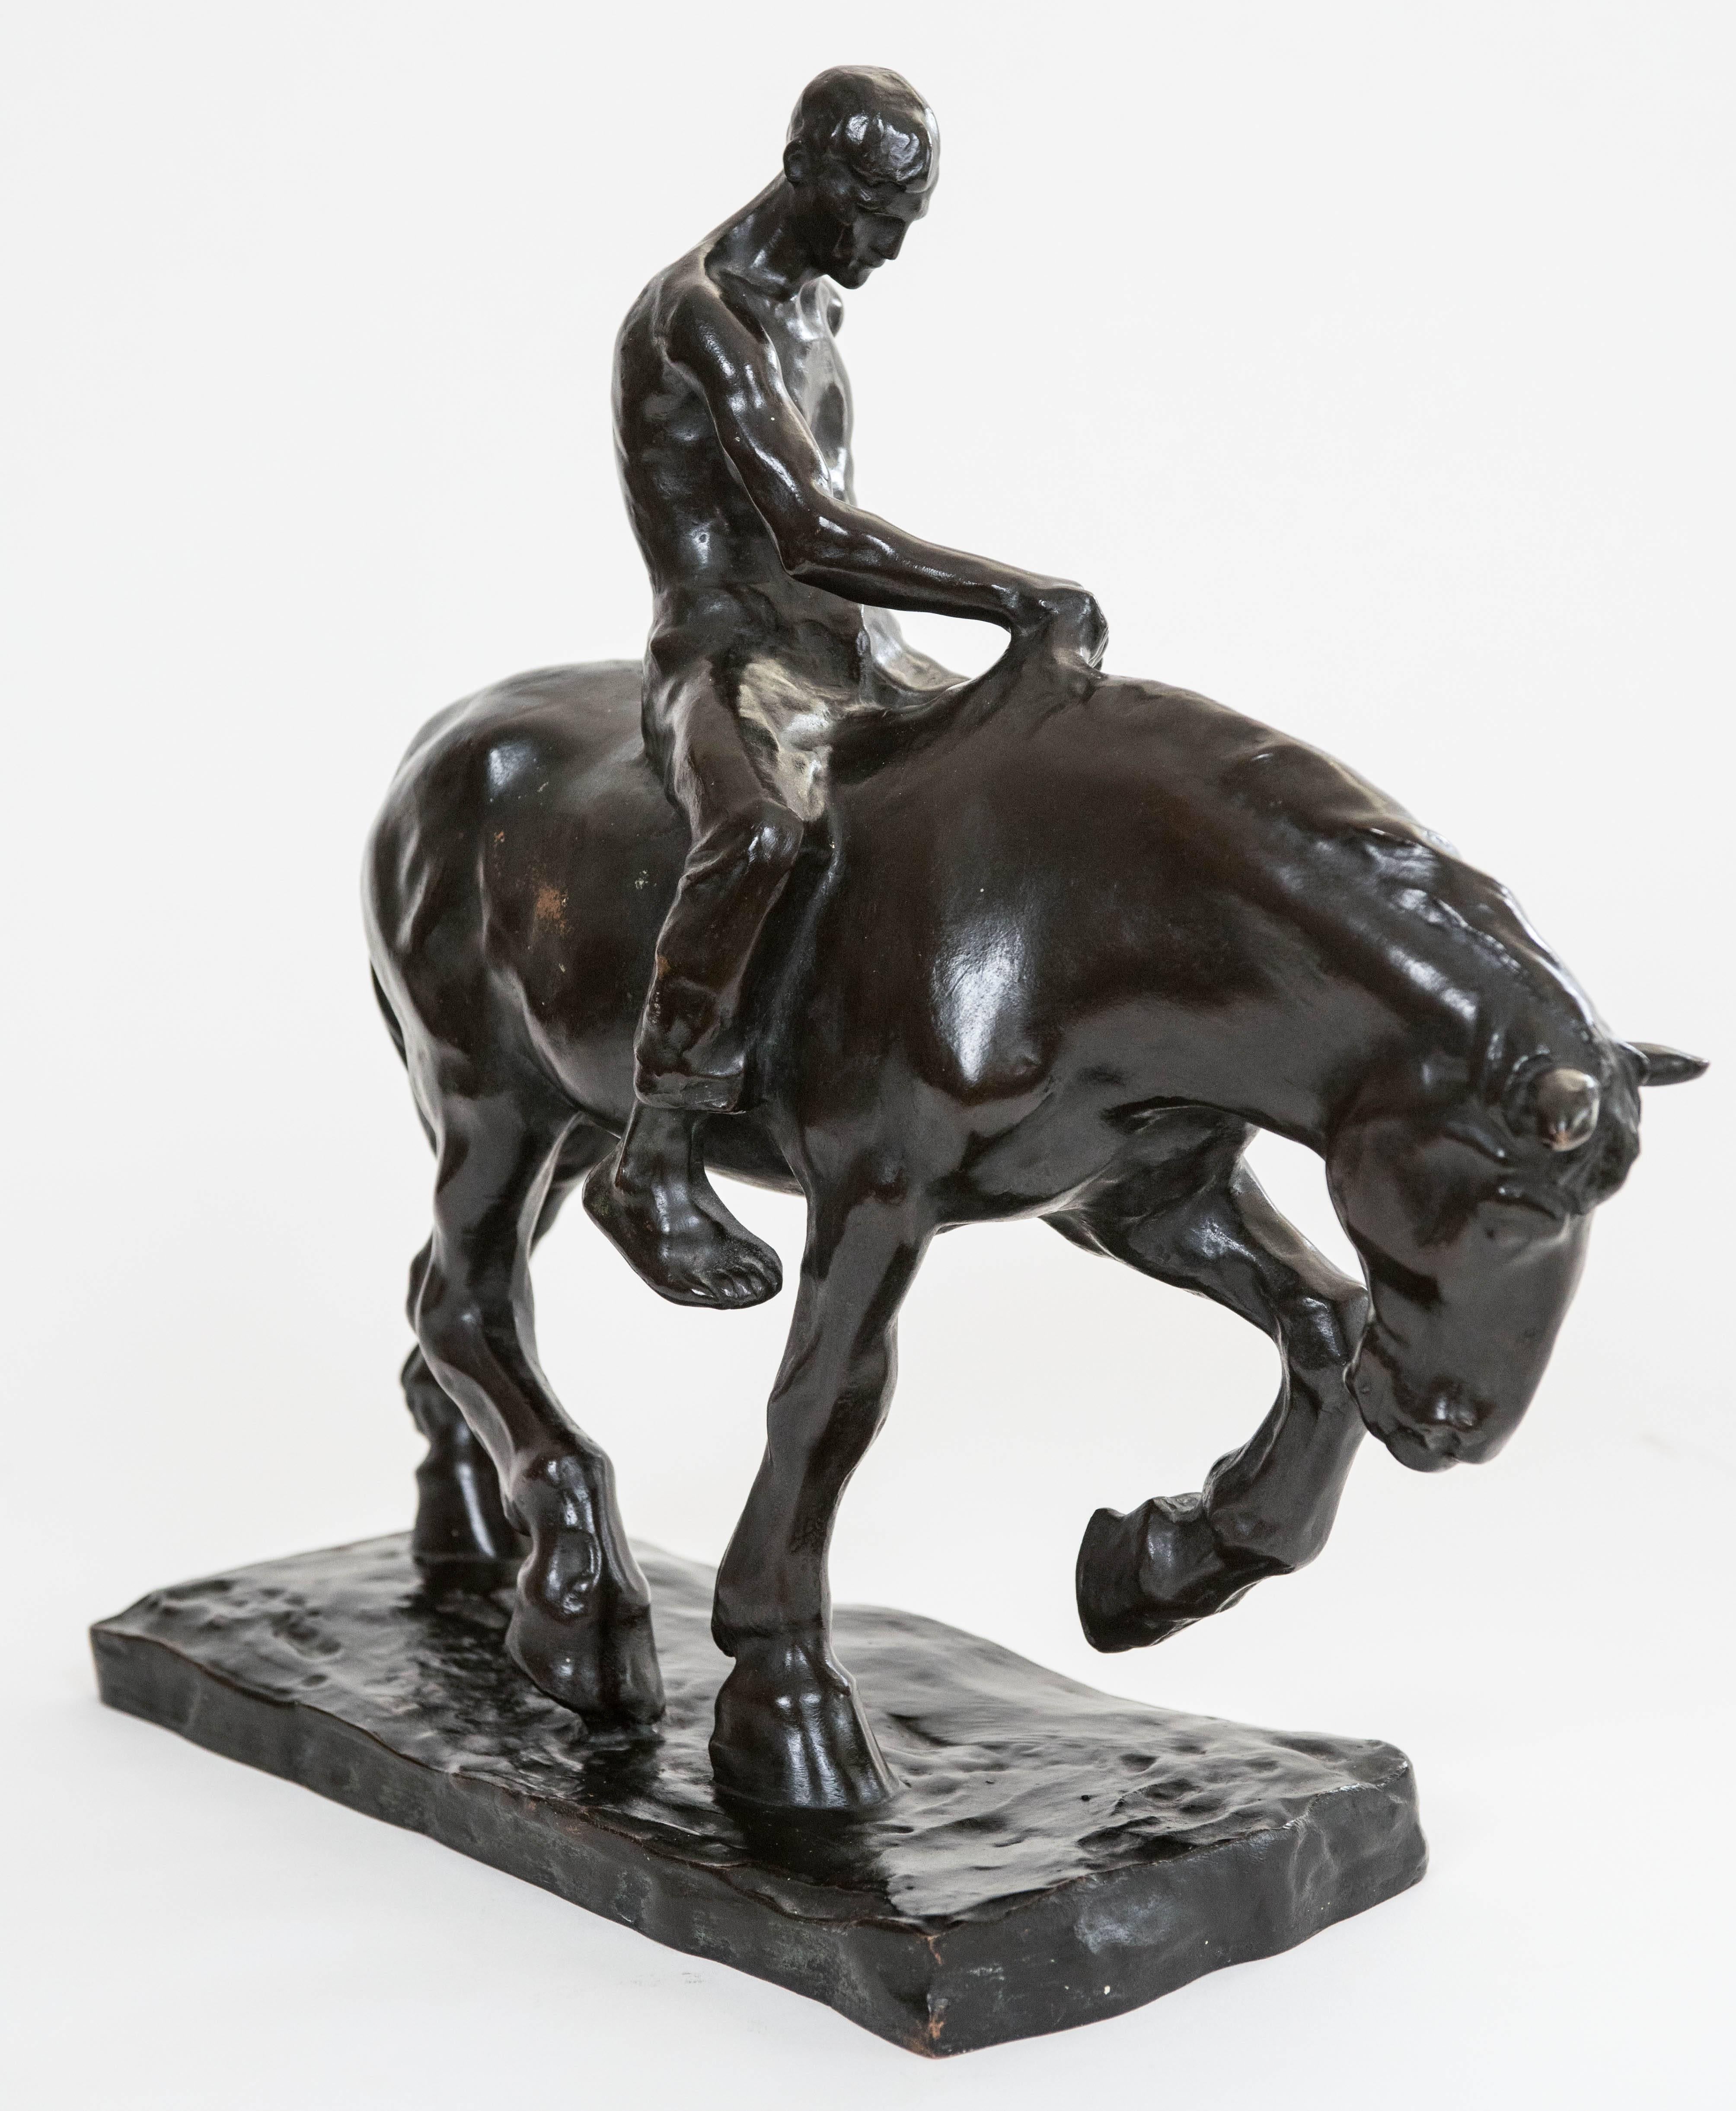 Julius Obst(1878-1939) is a 19 century German social realist sculptor.
''Cavalier'' is a bronze sculpture depicting a young man astride a working horse.
Signed.